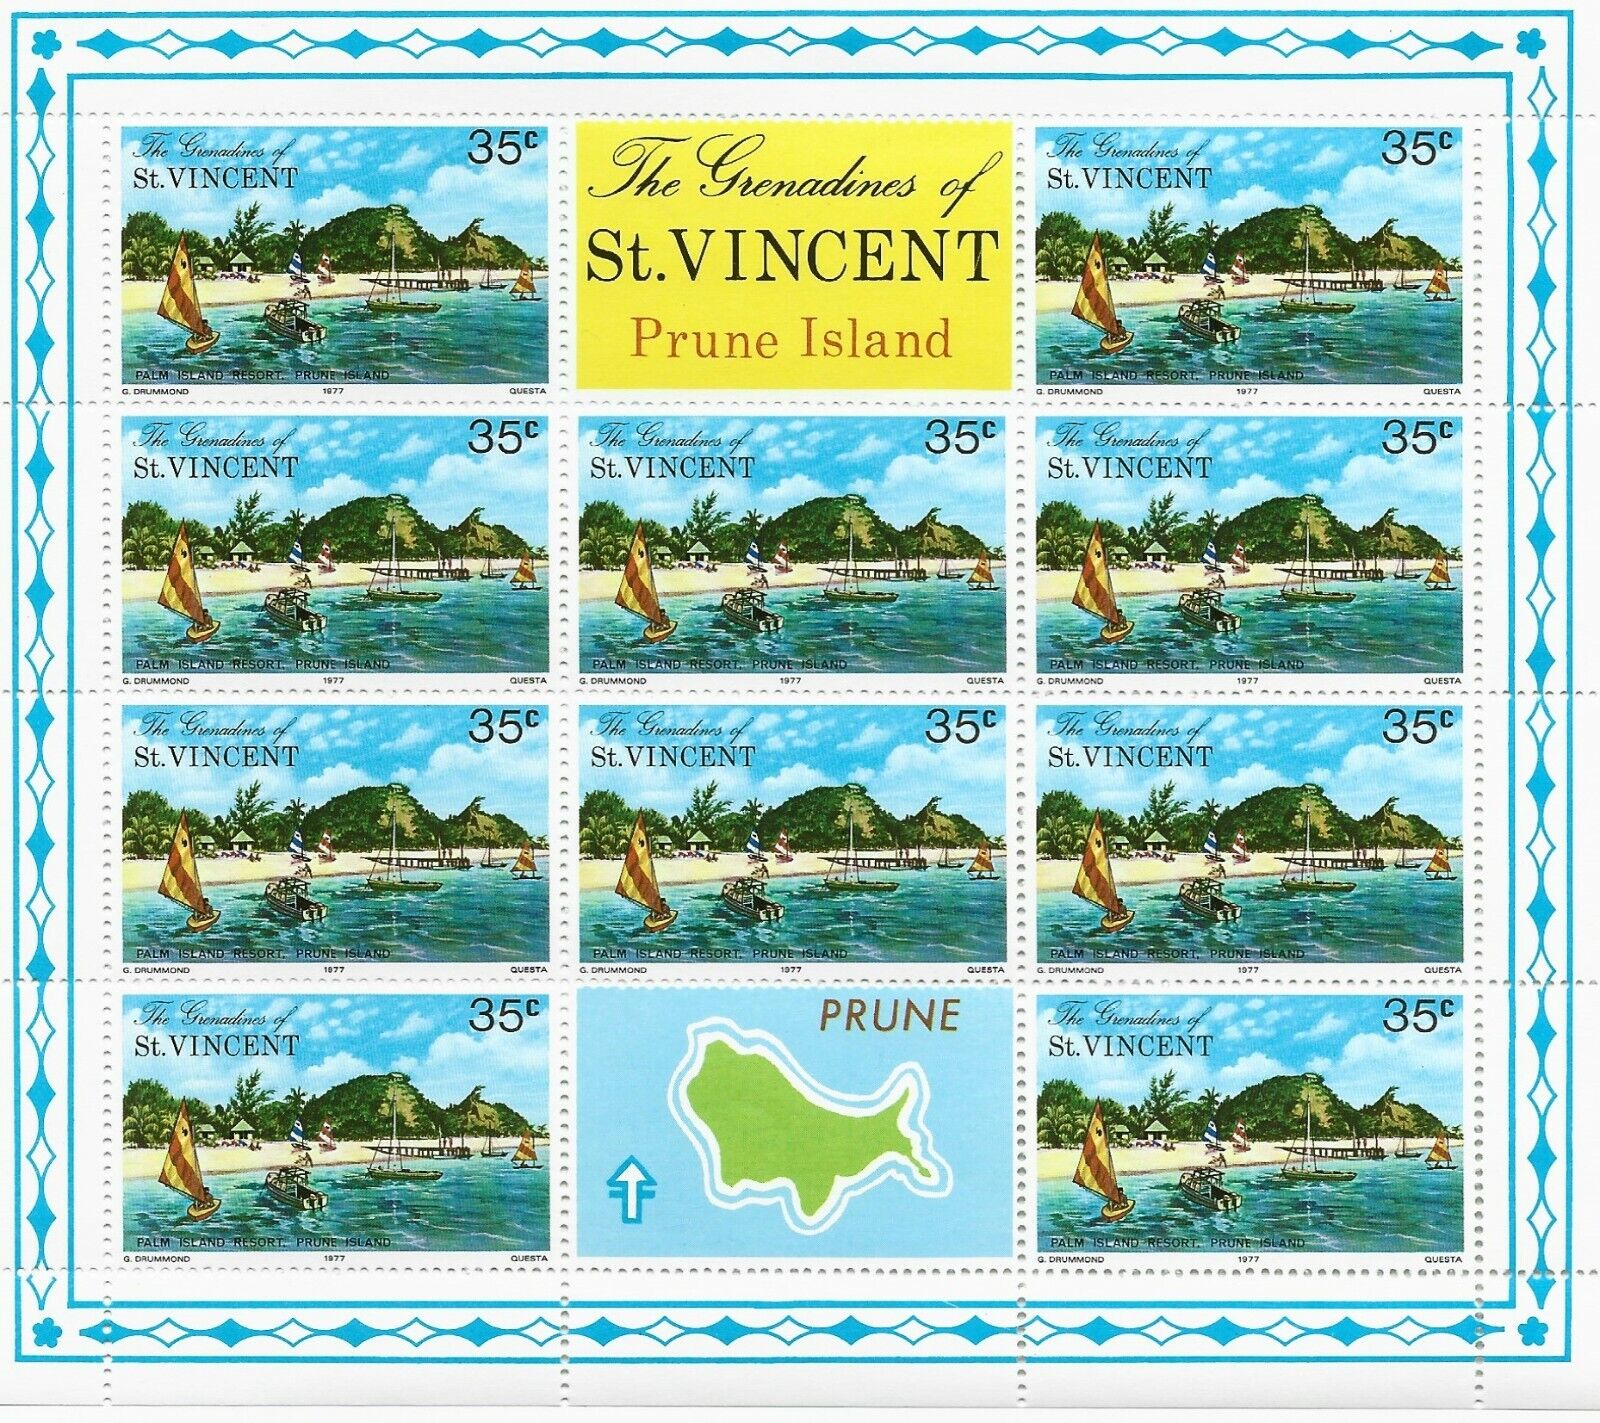 Mint Condition - St Vincent Animer and price revision 1977 Island Mini Sheet Prune Max 75% OFF